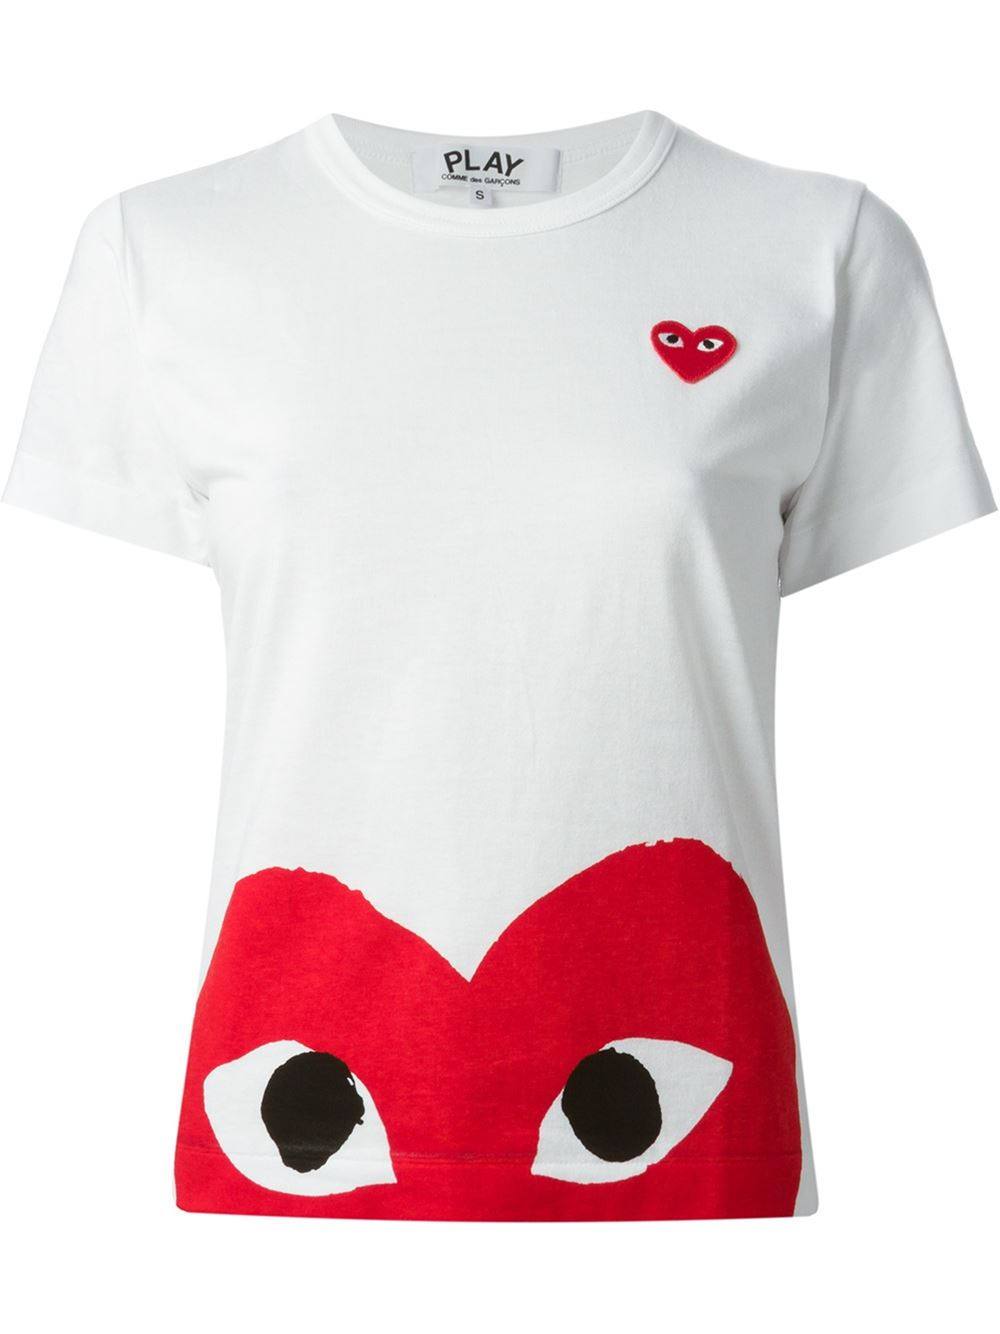 Play comme des garçons 'red Play' T-shirt in White - Save 19% | Lyst